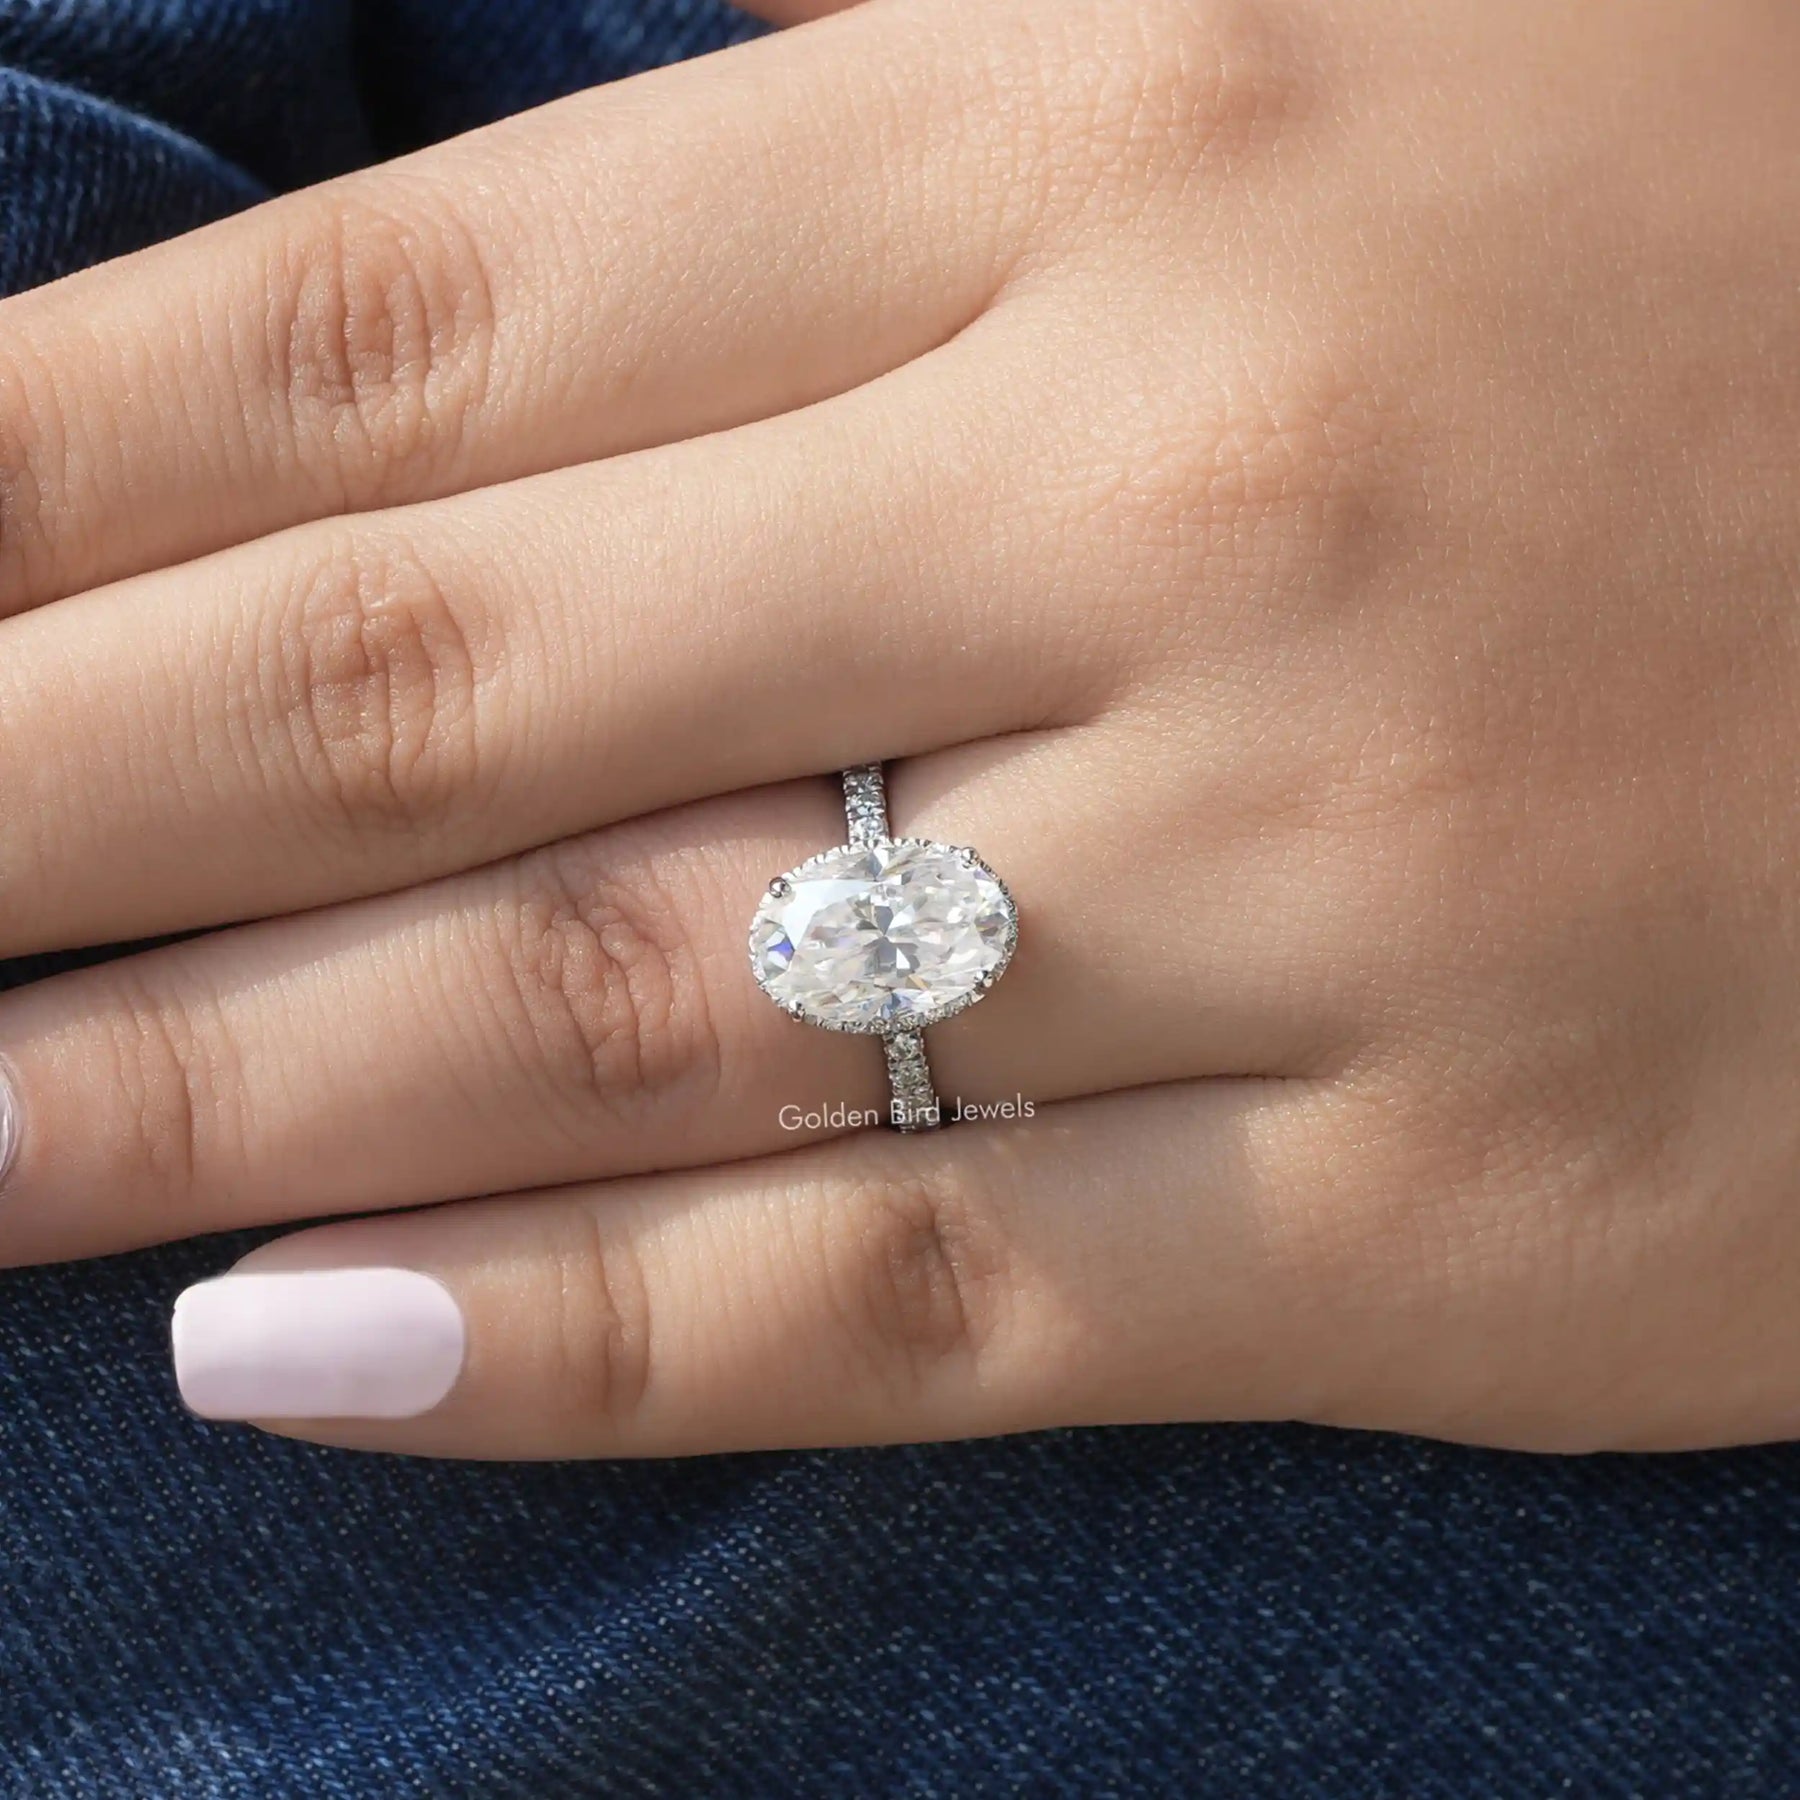 [In finger front view of oval cut engagement ring with 14k white gold]-[Golden Bird Jewels]